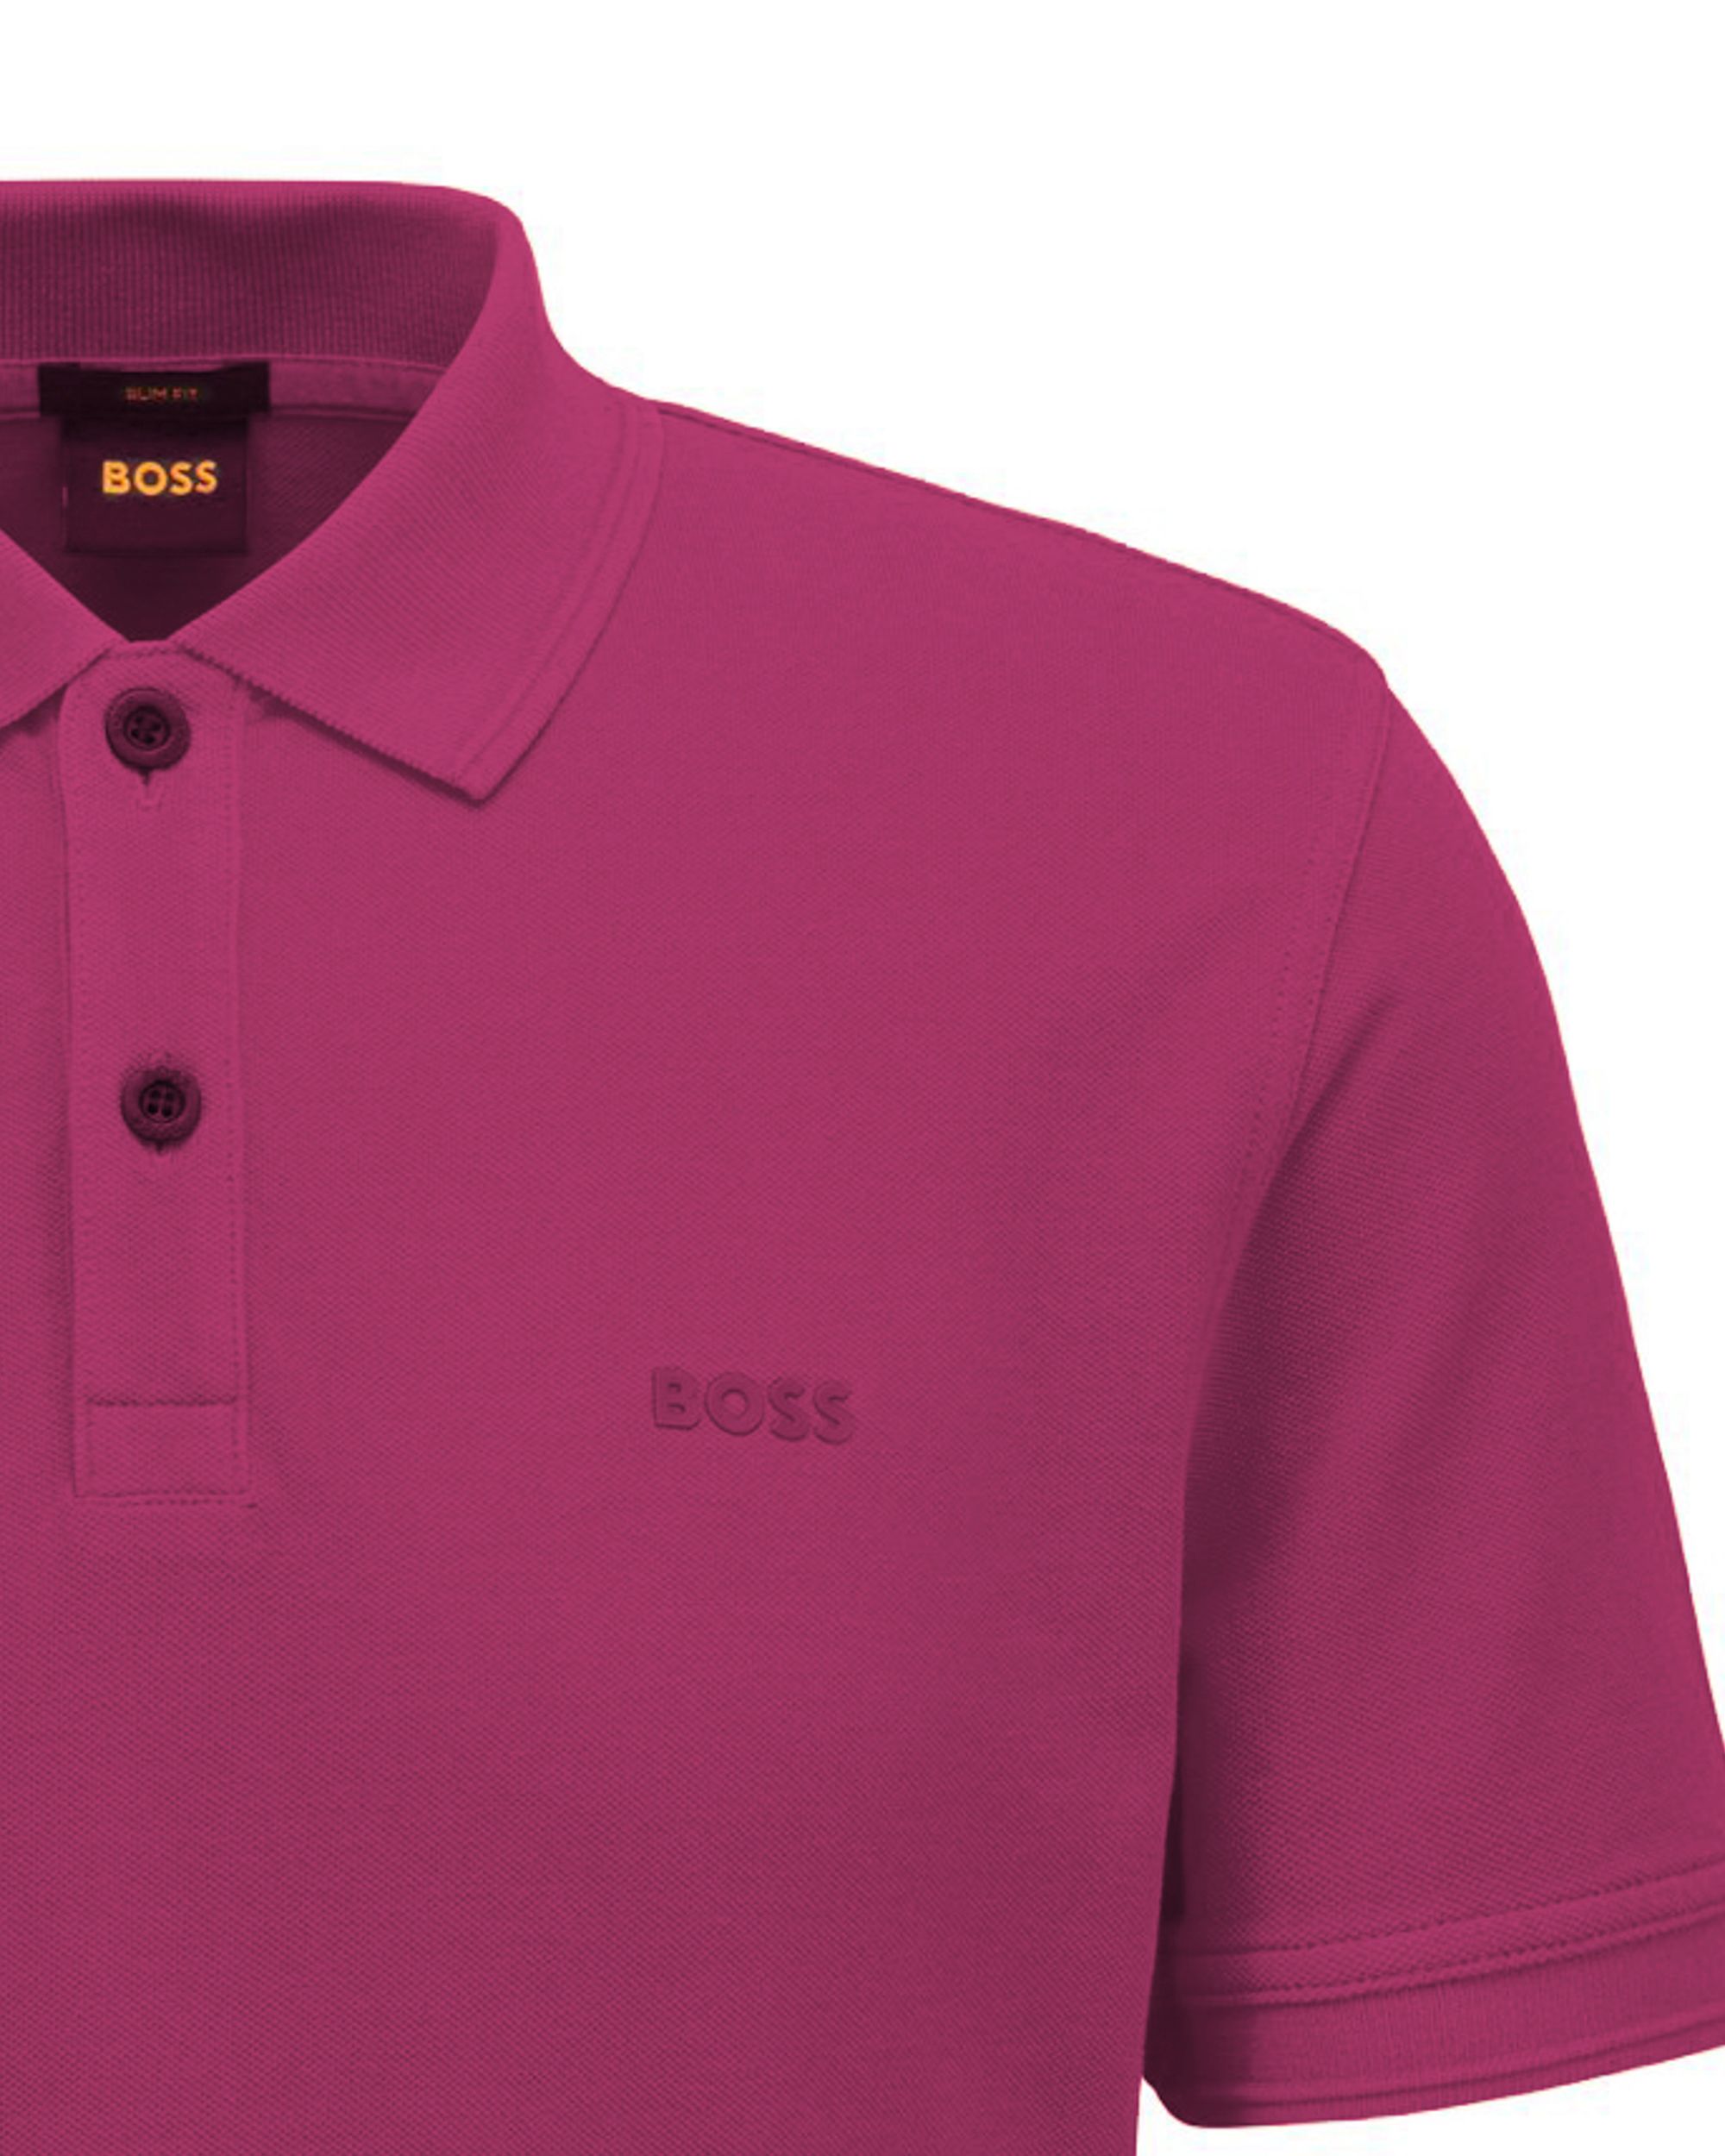 Hugo Boss Casual Prime Polo KM Paars 080843-001-L